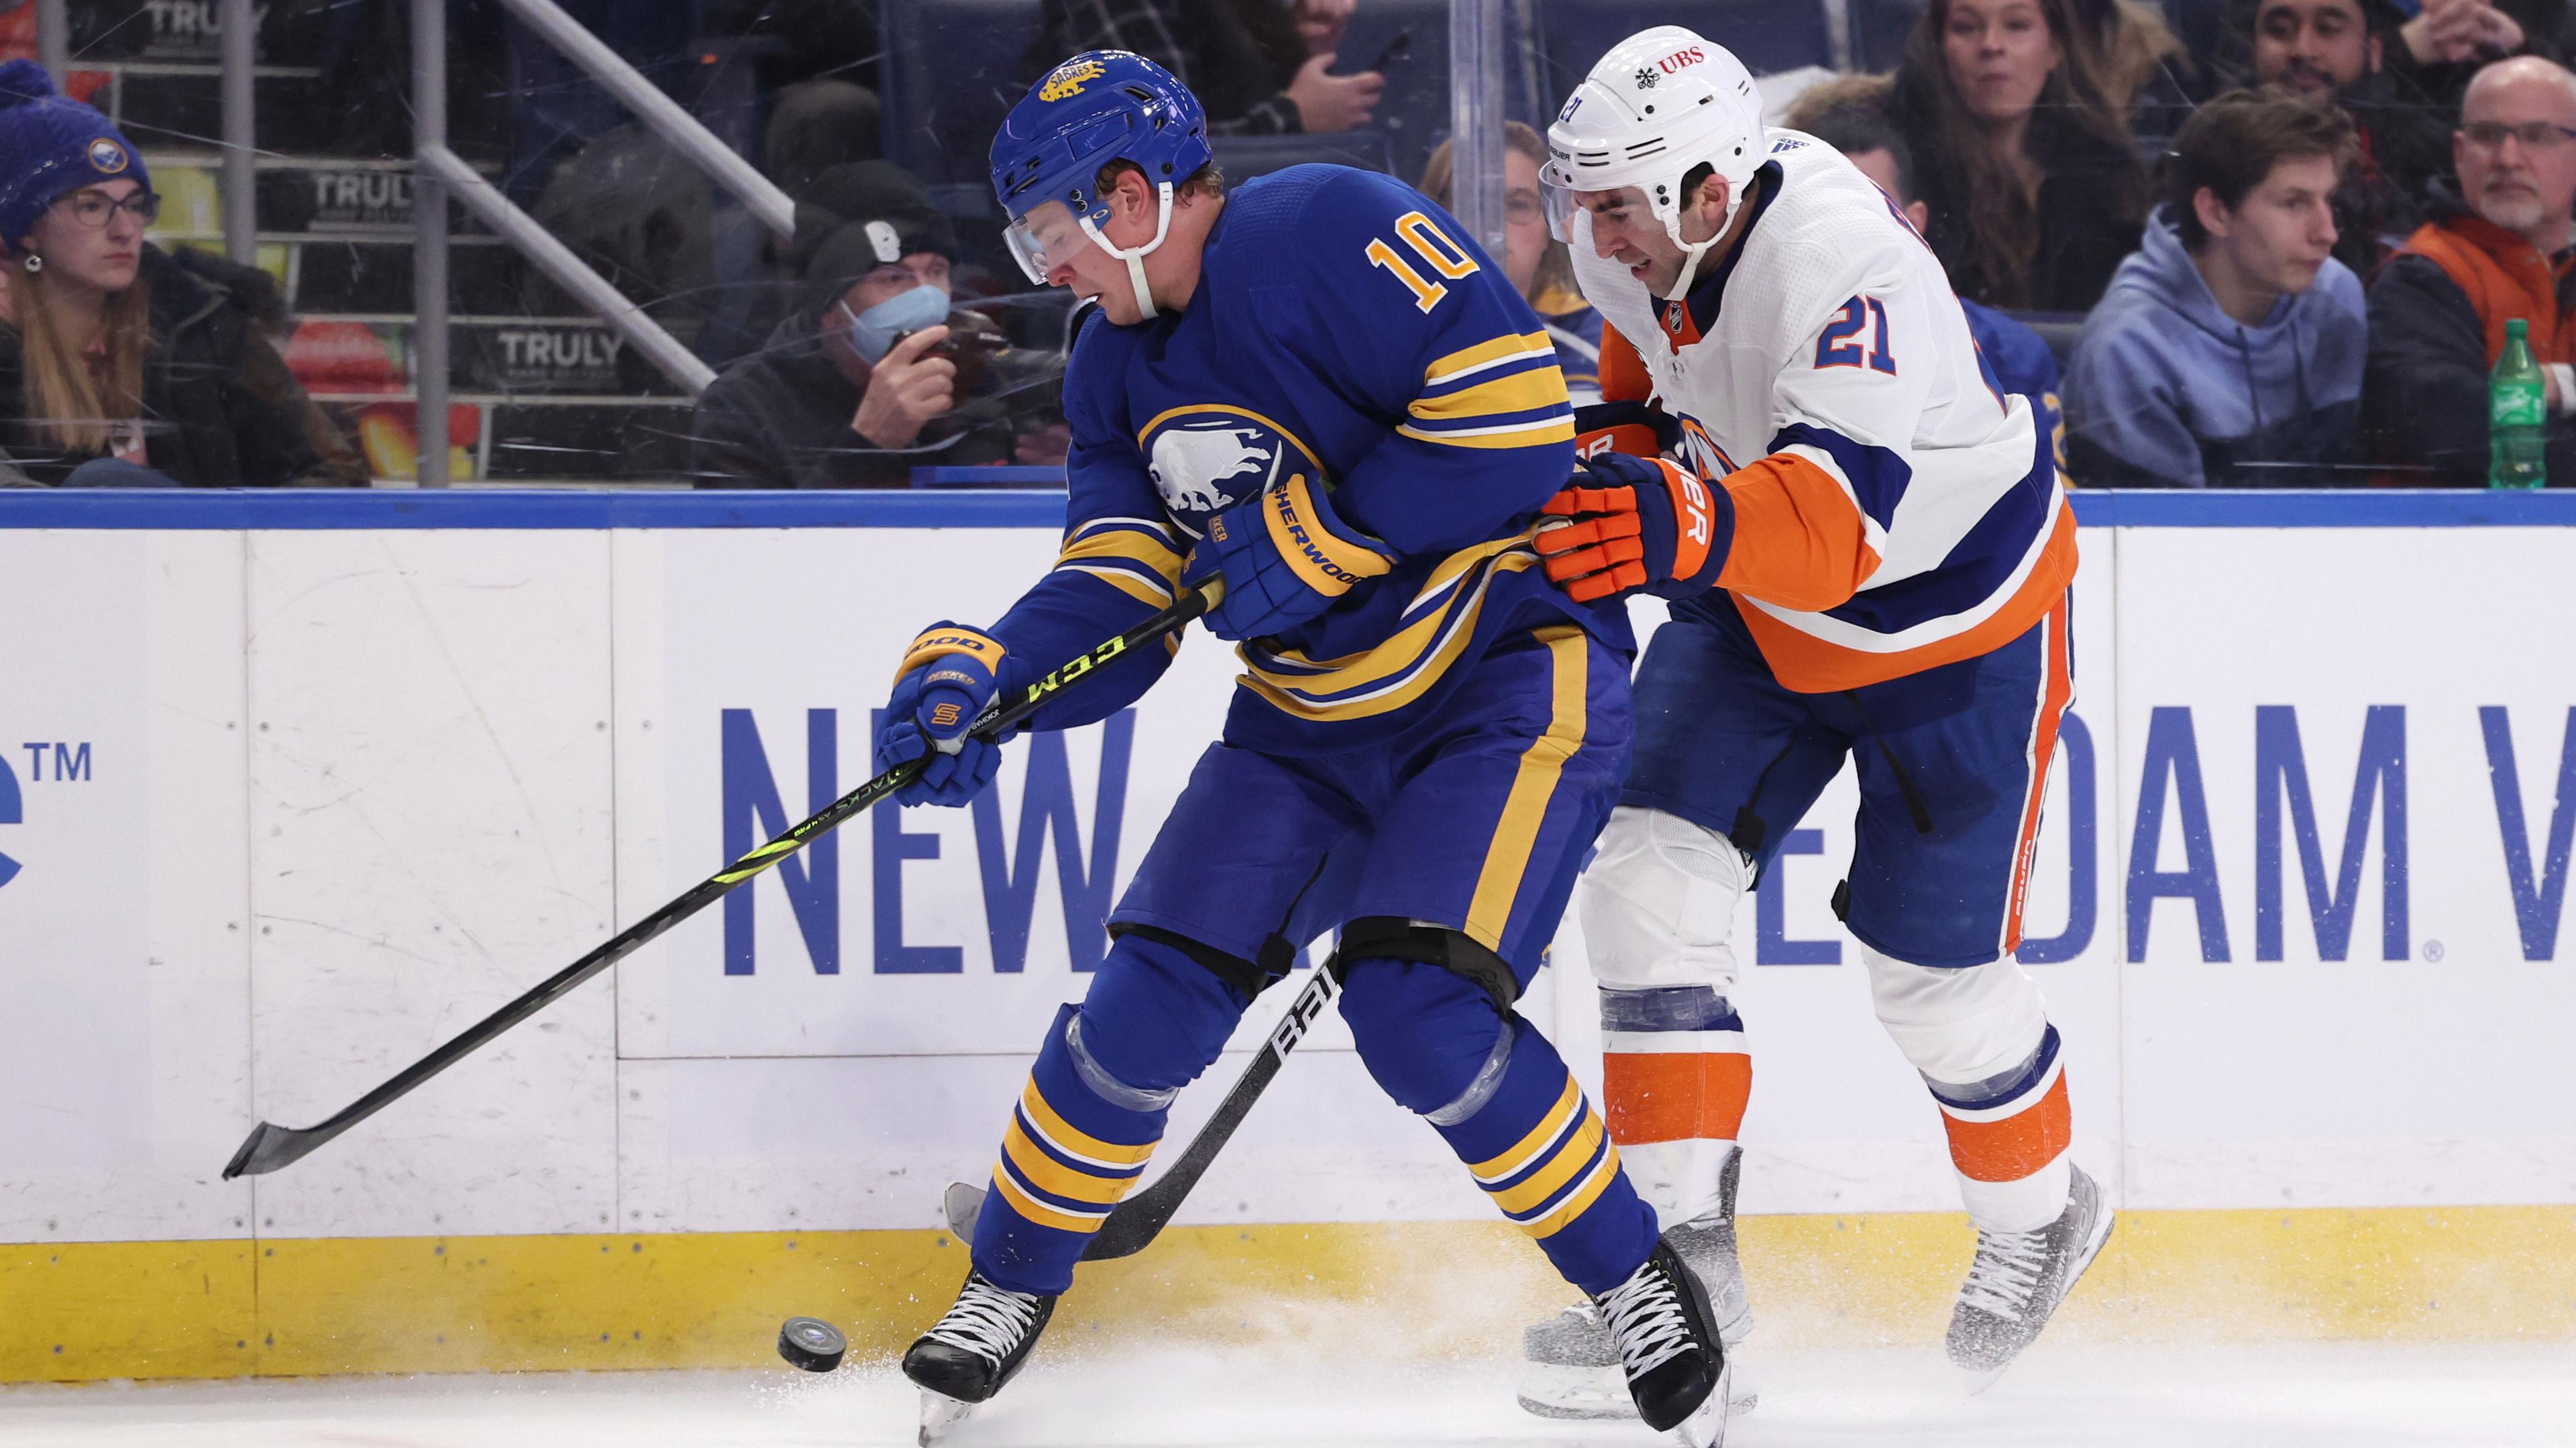 Feb 15, 2022; Buffalo, New York, USA; Buffalo Sabres defenseman Henri Jokiharju (10) and New York Islanders right wing Kyle Palmieri (21) go after a loose puck along the boards during the first period at KeyBank Center. / Timothy T. Ludwig-USA TODAY Sports